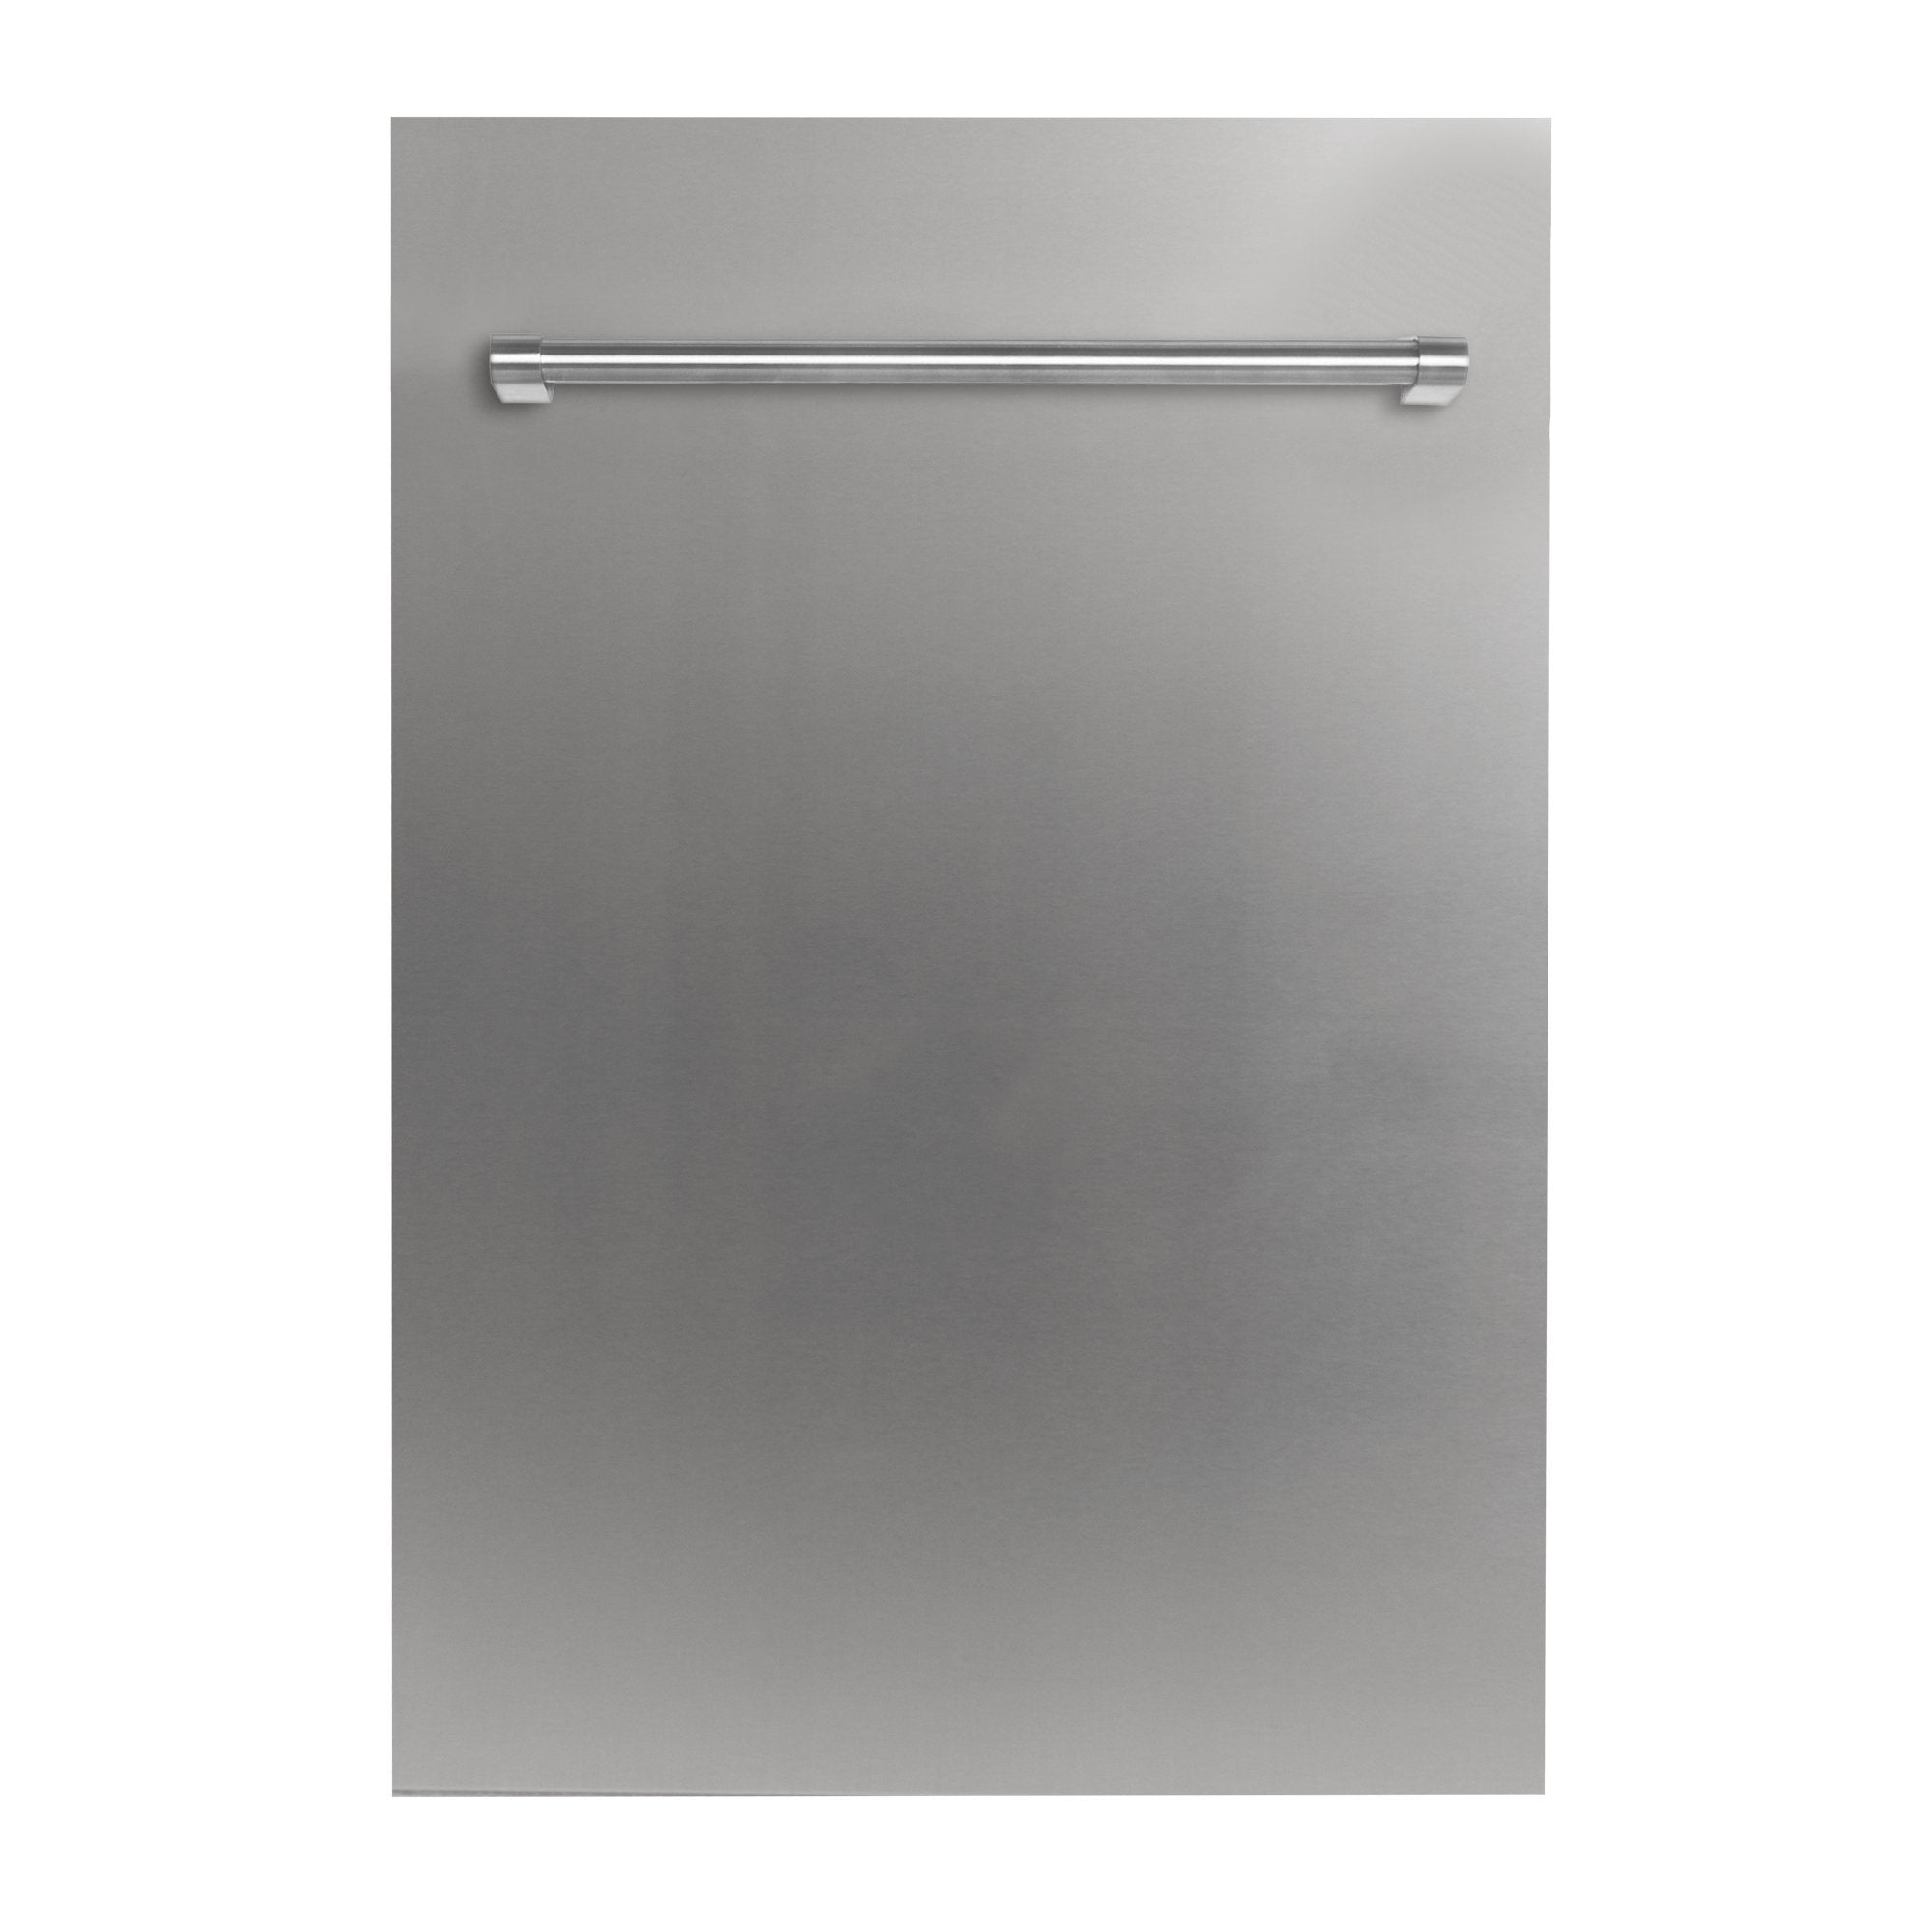 ZLINE Kitchen and Bath, ZLINE 18" Top Control Dishwasher with Stainless Steel Tub and Traditional Style Handle, DW-304-H-18,